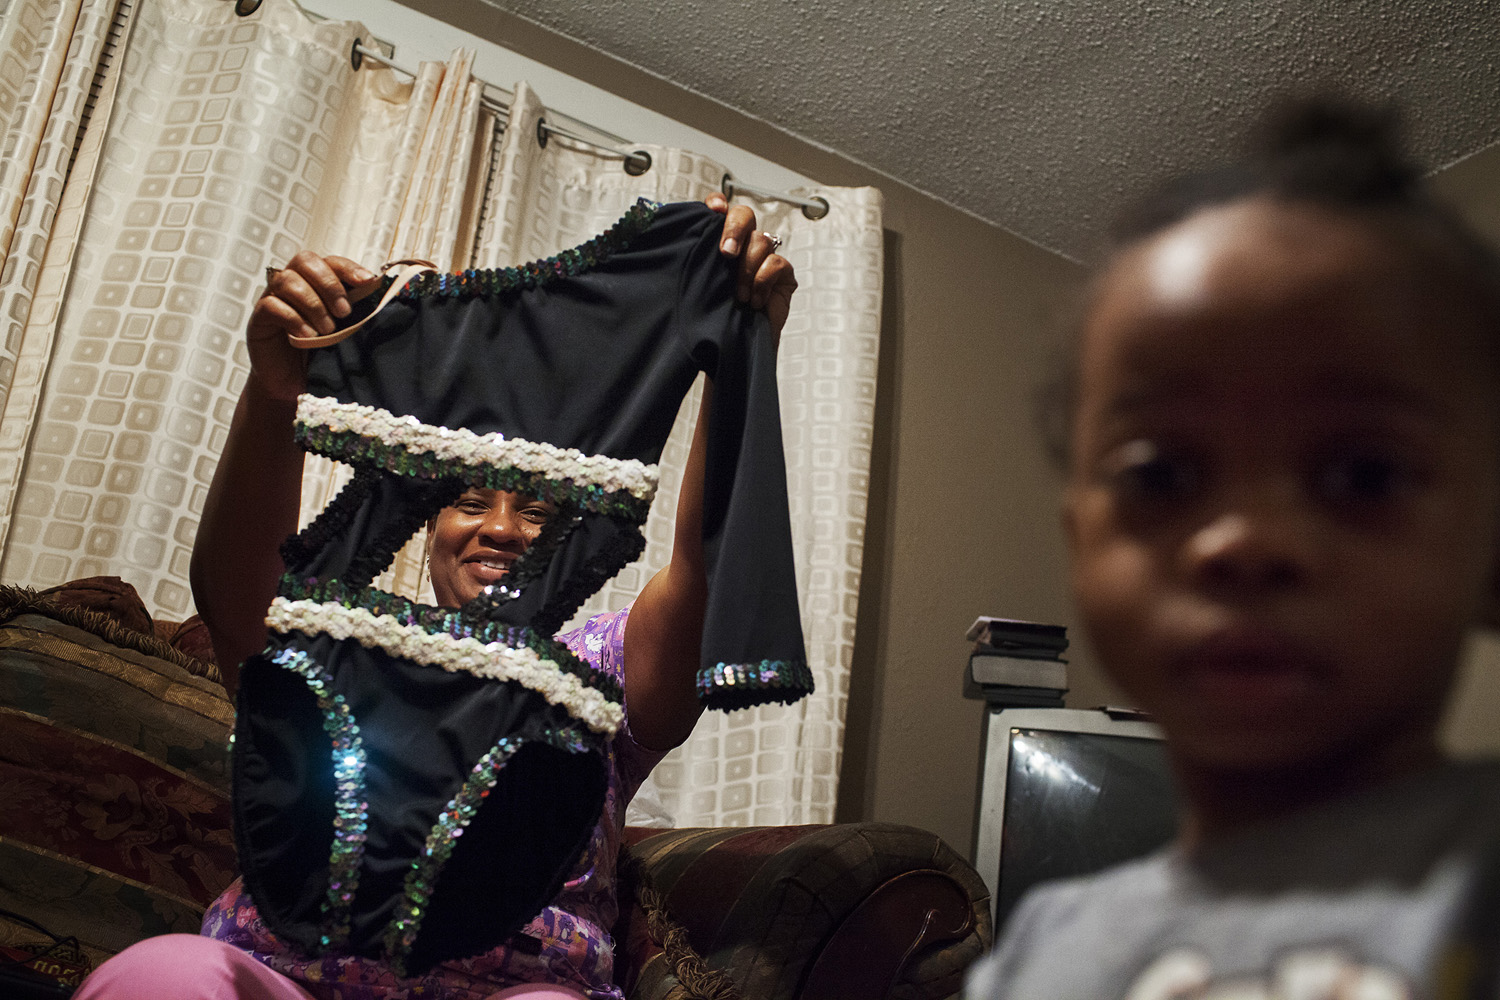 Kentrell's mother holds up a leotard he designed and customized, admiring his craftsmansip. Kentrell designs many of the costumes for the Prancing Elites, often working on a shoestring budget to create eye-catching and exciting matching outfits for performances. The Prancing Elites are a group of young, gay, black men who practice J-Sette, a form of dance birthed at Historically Black Colleges that is characterized by sharp, cheerleading-style movements and hip-hop performed to an eight-count beat. Traditionally, men cannot join college dance teams, so young gay black men have been forming their own J-Sette "lines," organizing competitions, and creating their own outlets to practice this type of dance.